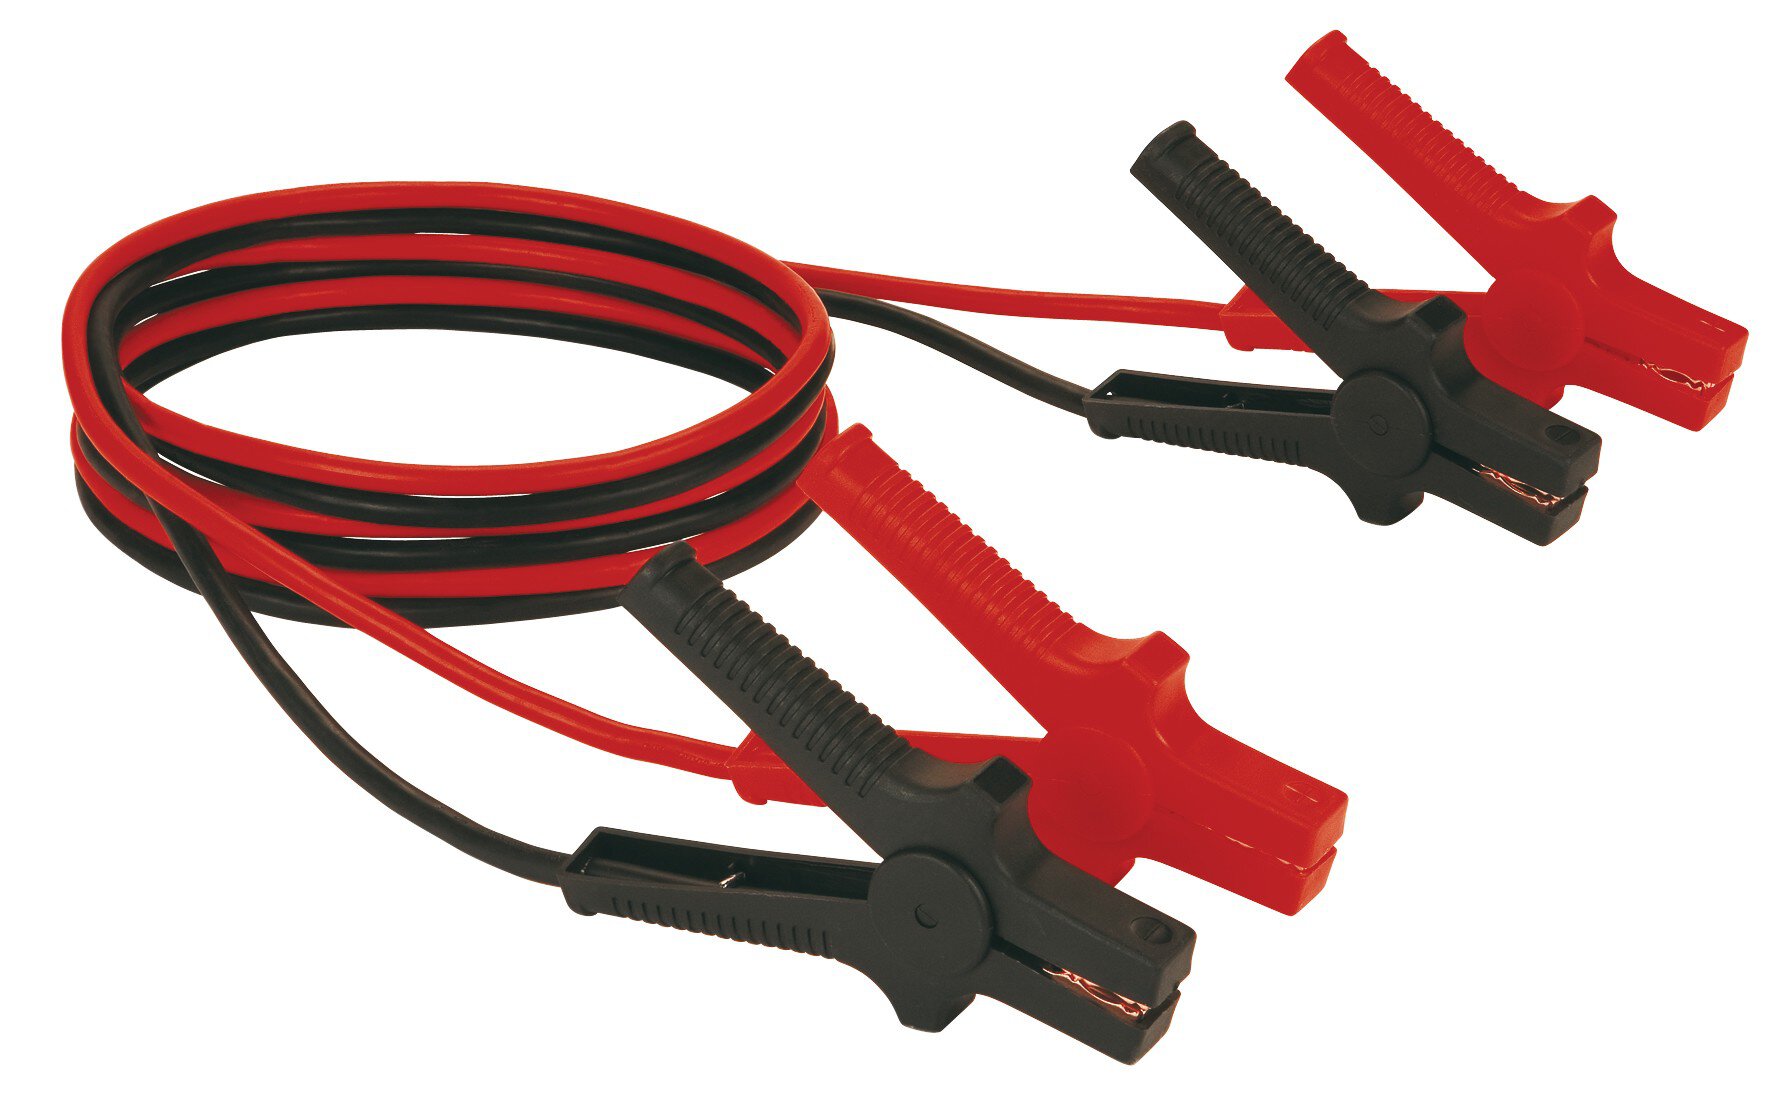 einhell-car-classic-booster-cable-2030335-productimage-001